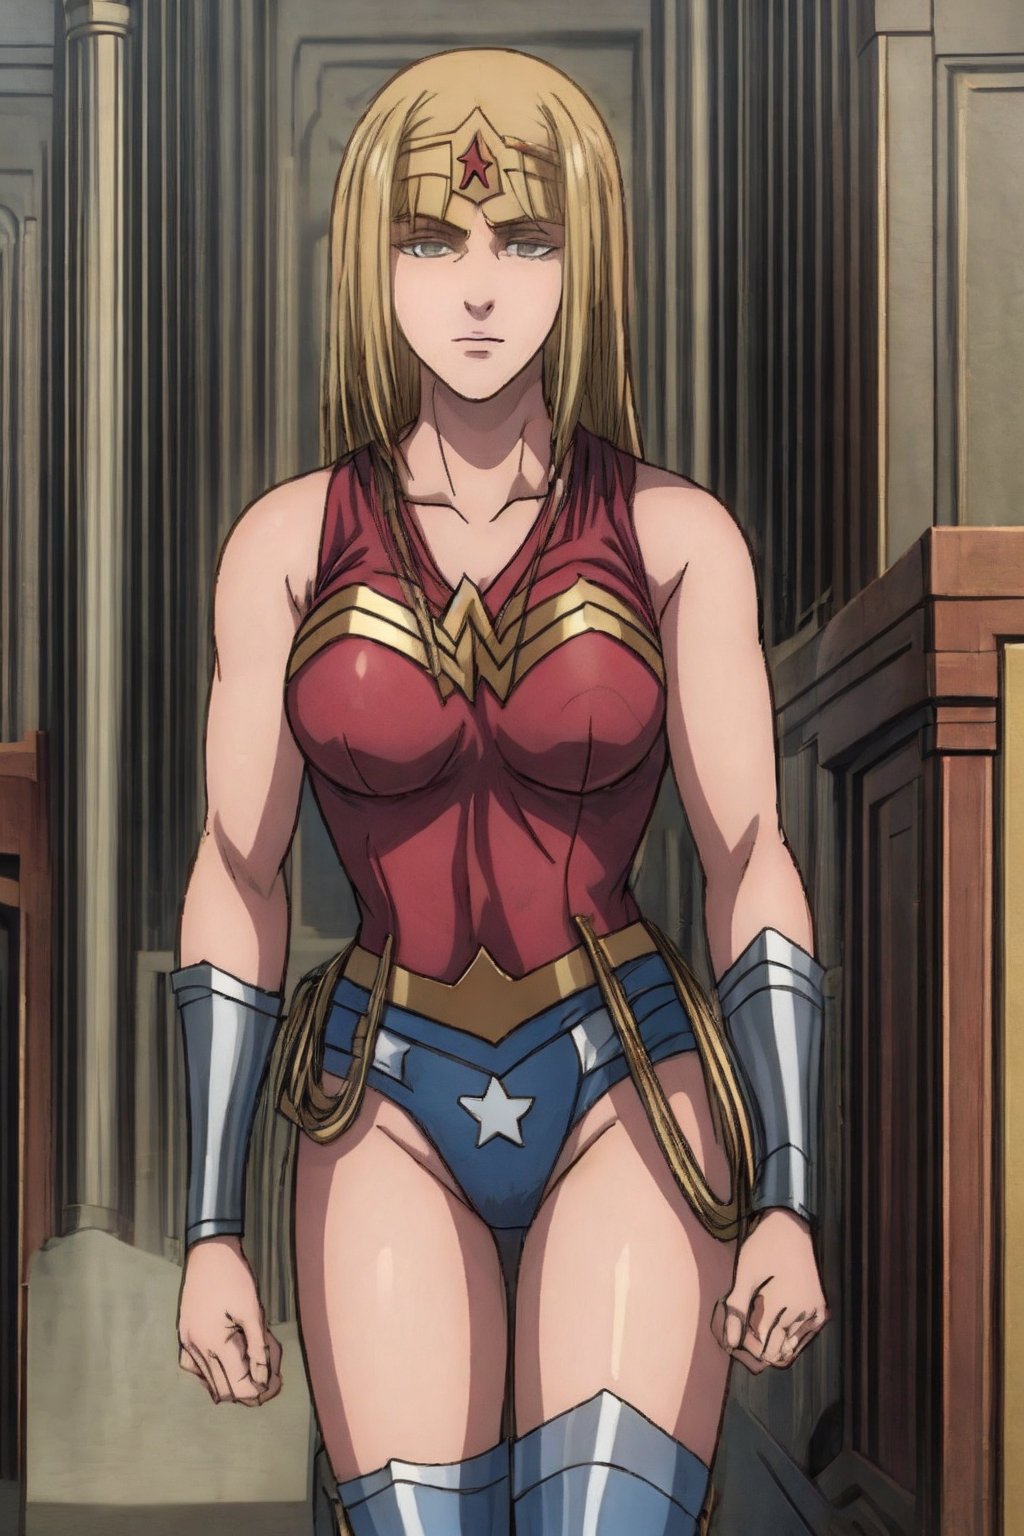 1 girl, alone, city, masterpiece, very detailed, blonde, long hair Lora de Ymir, soft smile, wearing, the costume, wonder woman,wonder2, big breasts, sword in right fist